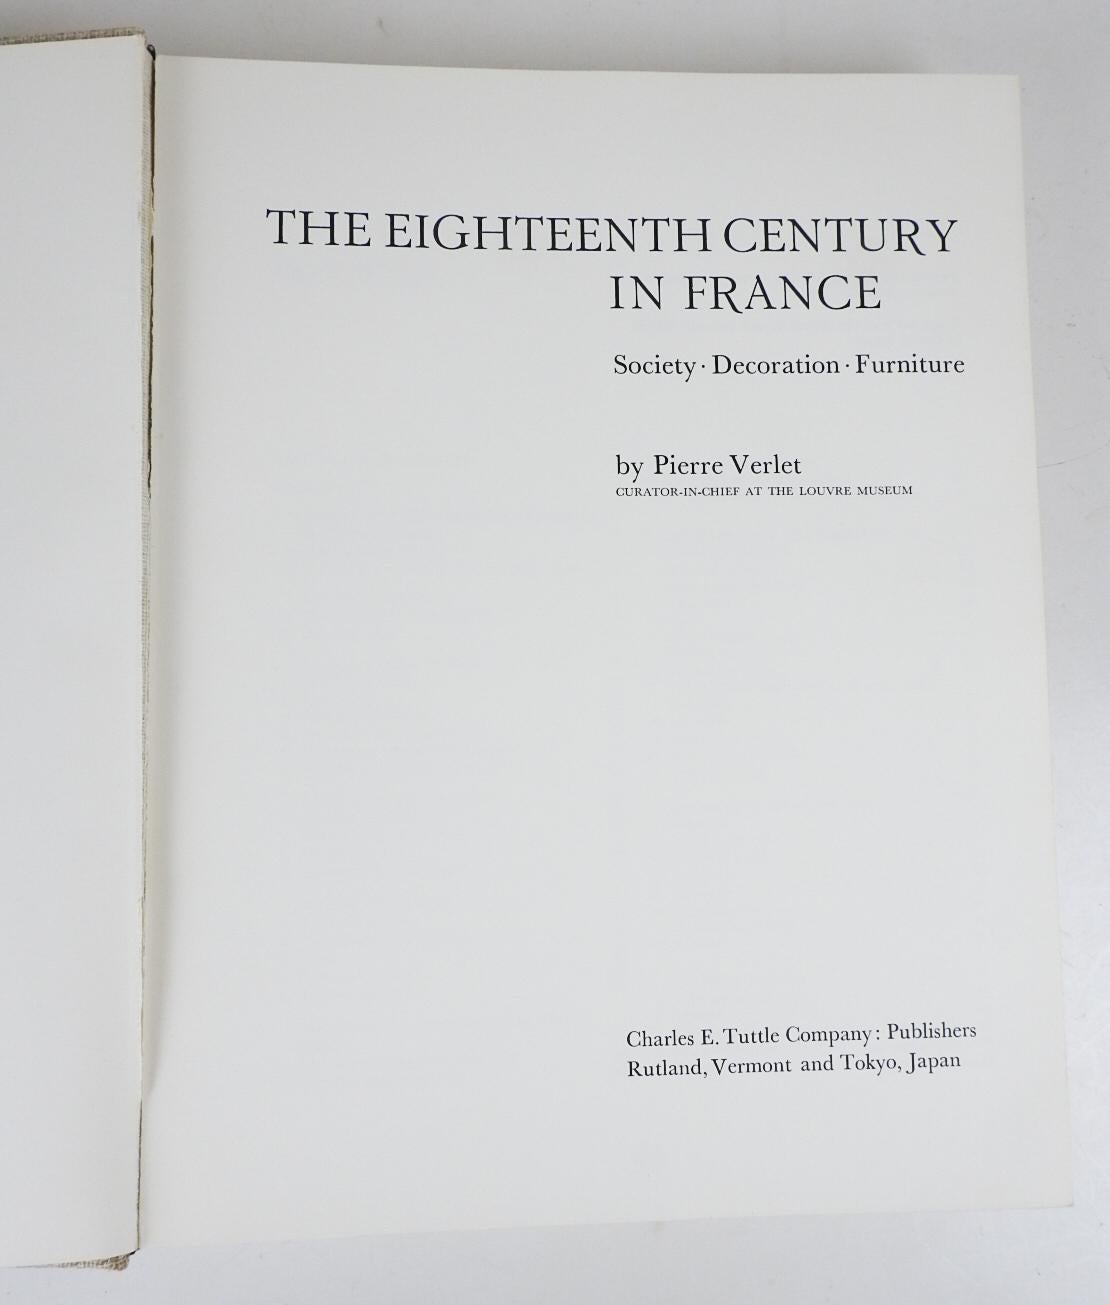 The Eighteenth Century in France: Society, Decoration and Furniture by Pierre Verlet.  Published by Charles Tuttle, Rutland Vermont, 1967.  Ecru cloth binding, many color and black and white illustrations, minor shelf wear.